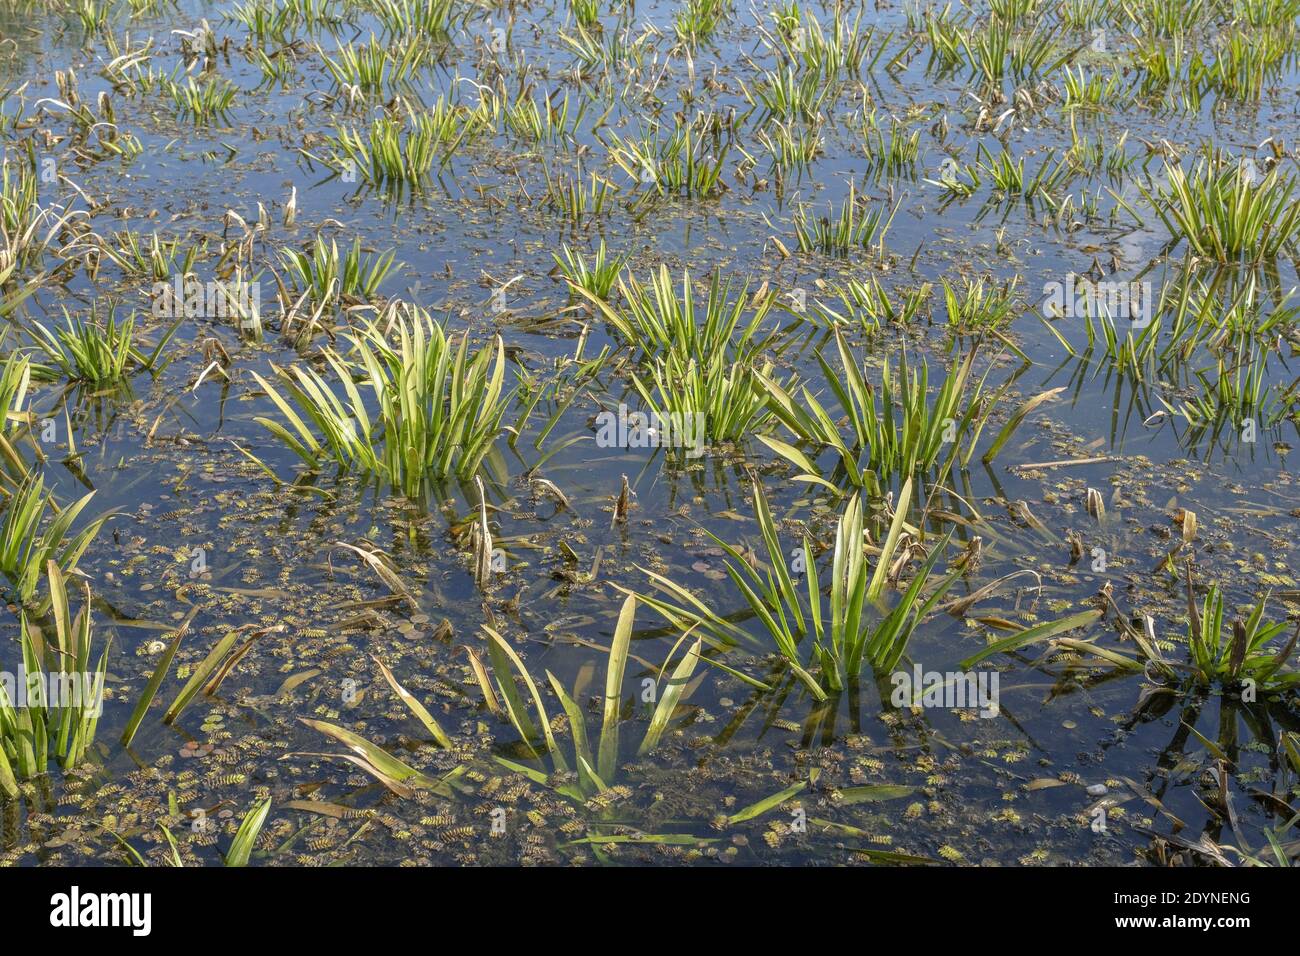 Aquatic plant Water-soldier or water pineapple (Stratiotes aloides) Stock Photo